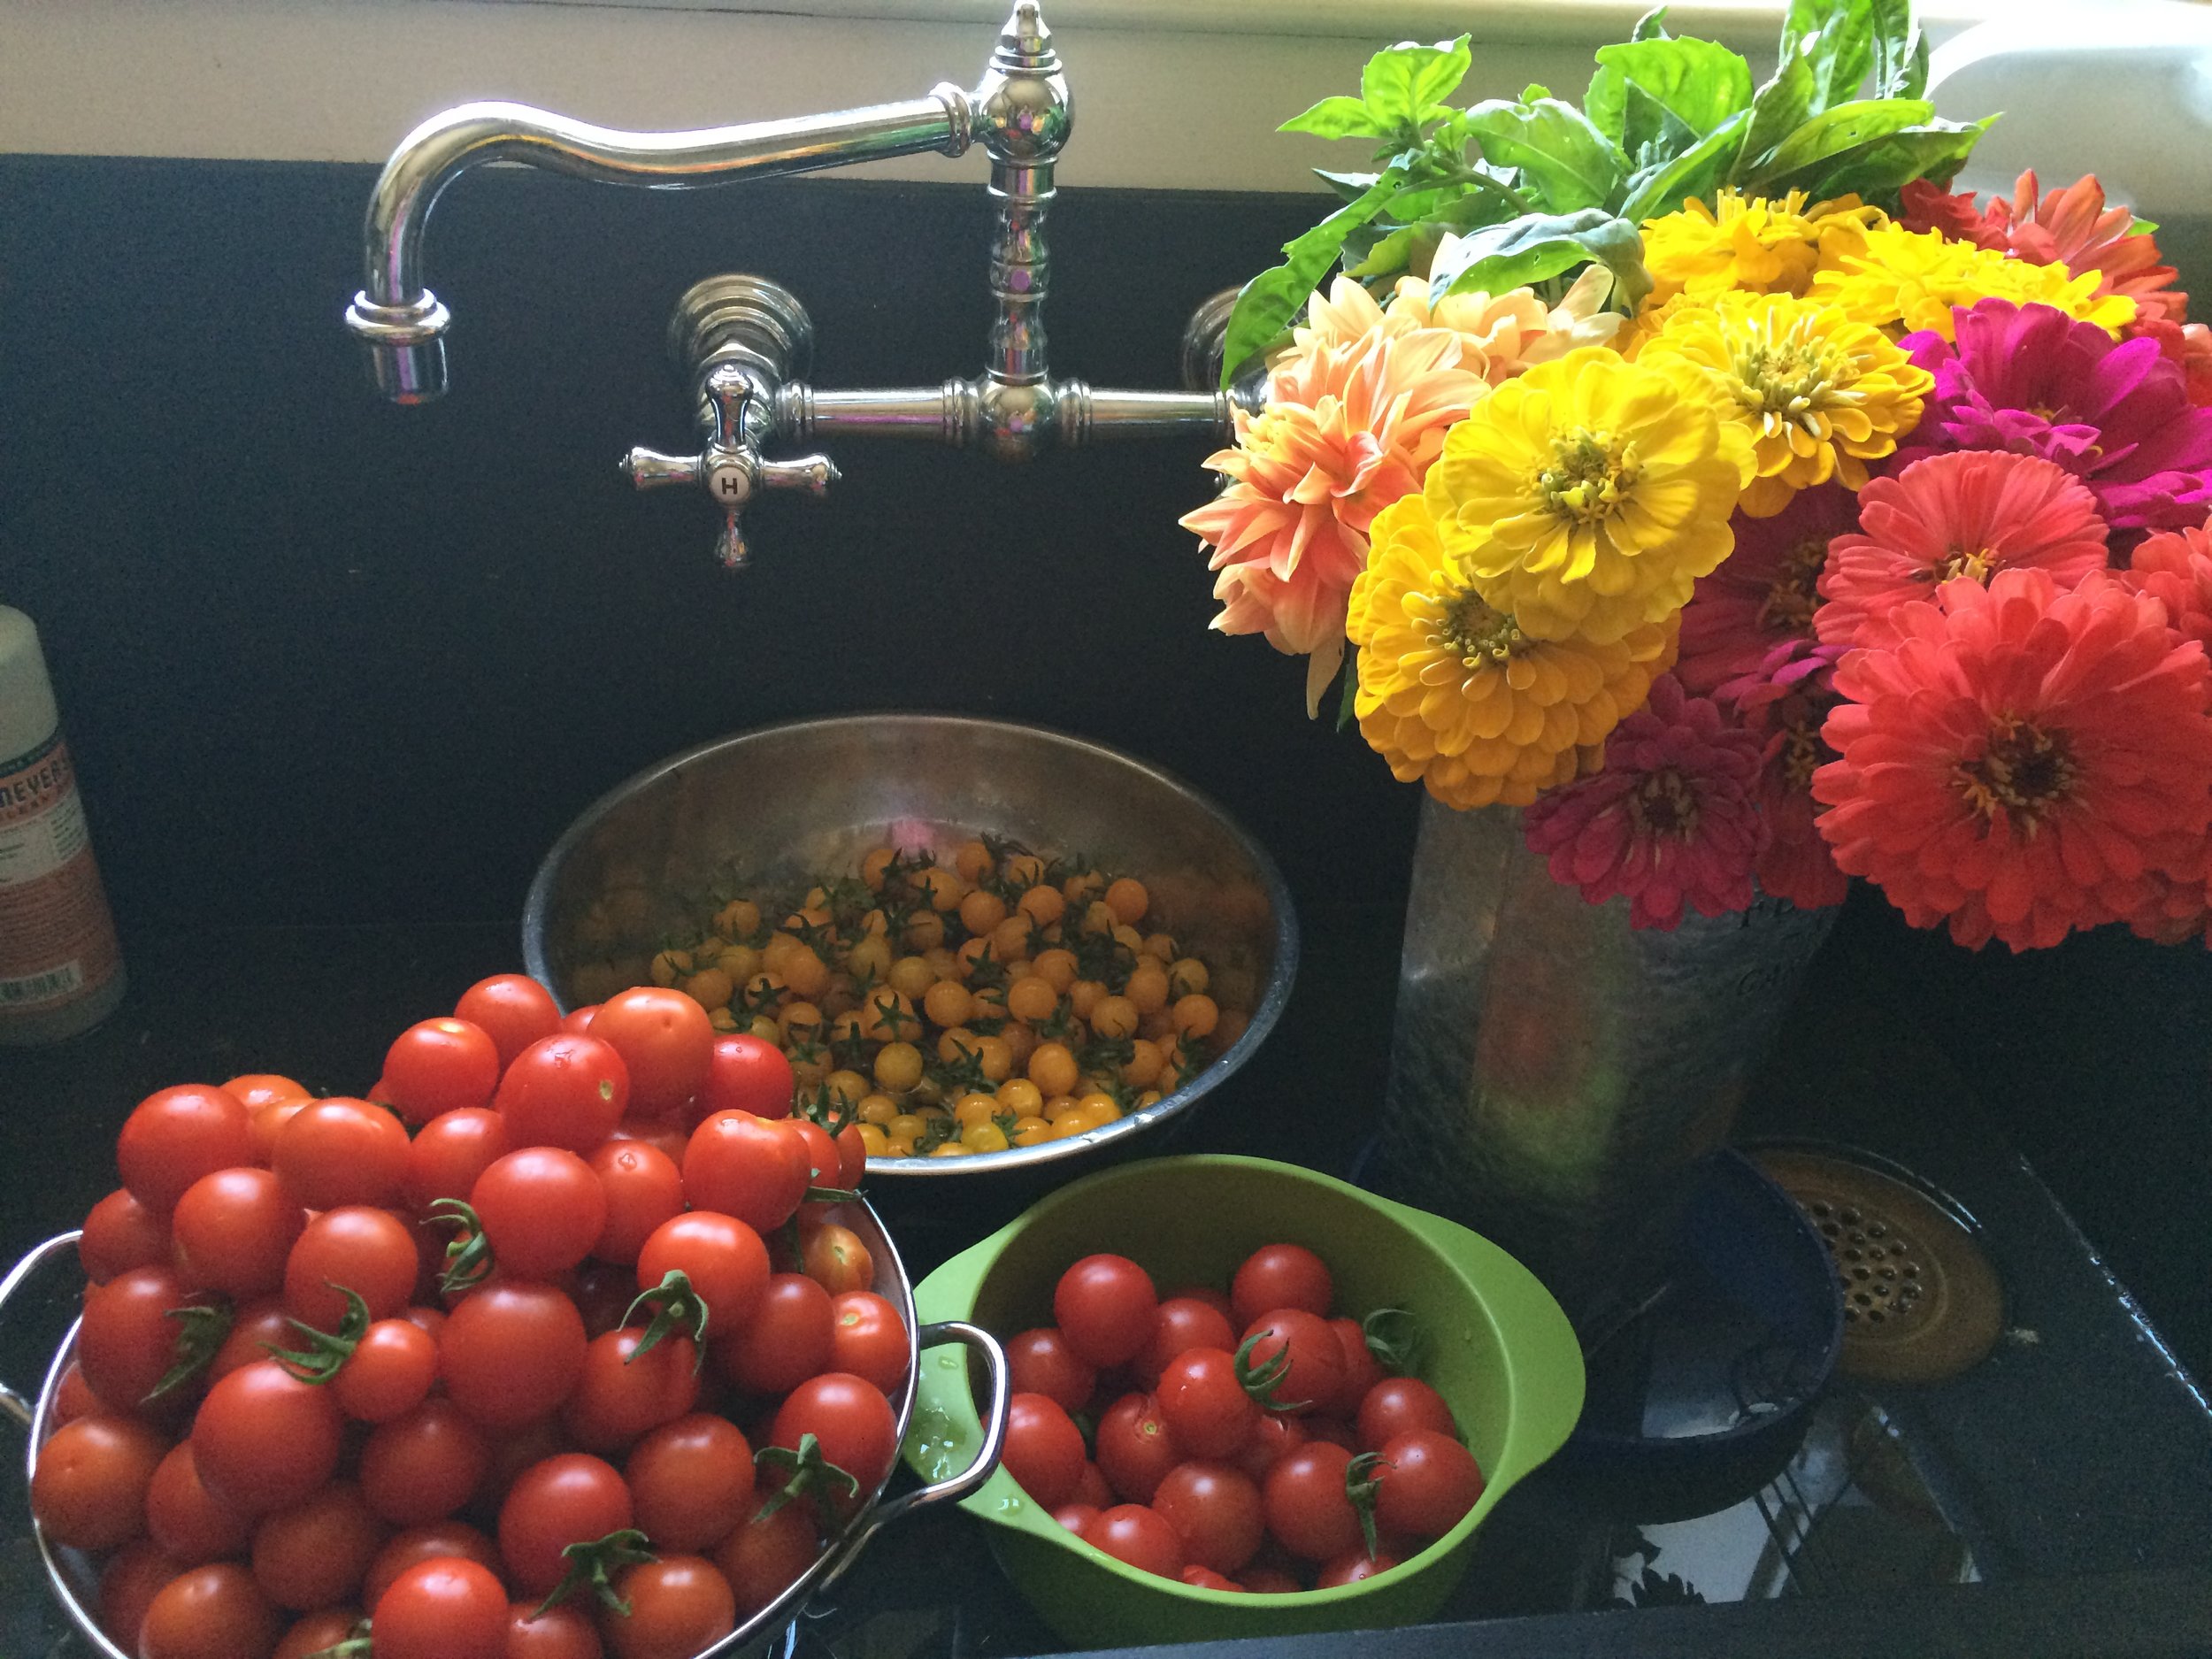 Fresh flowers and tomatoes in sink